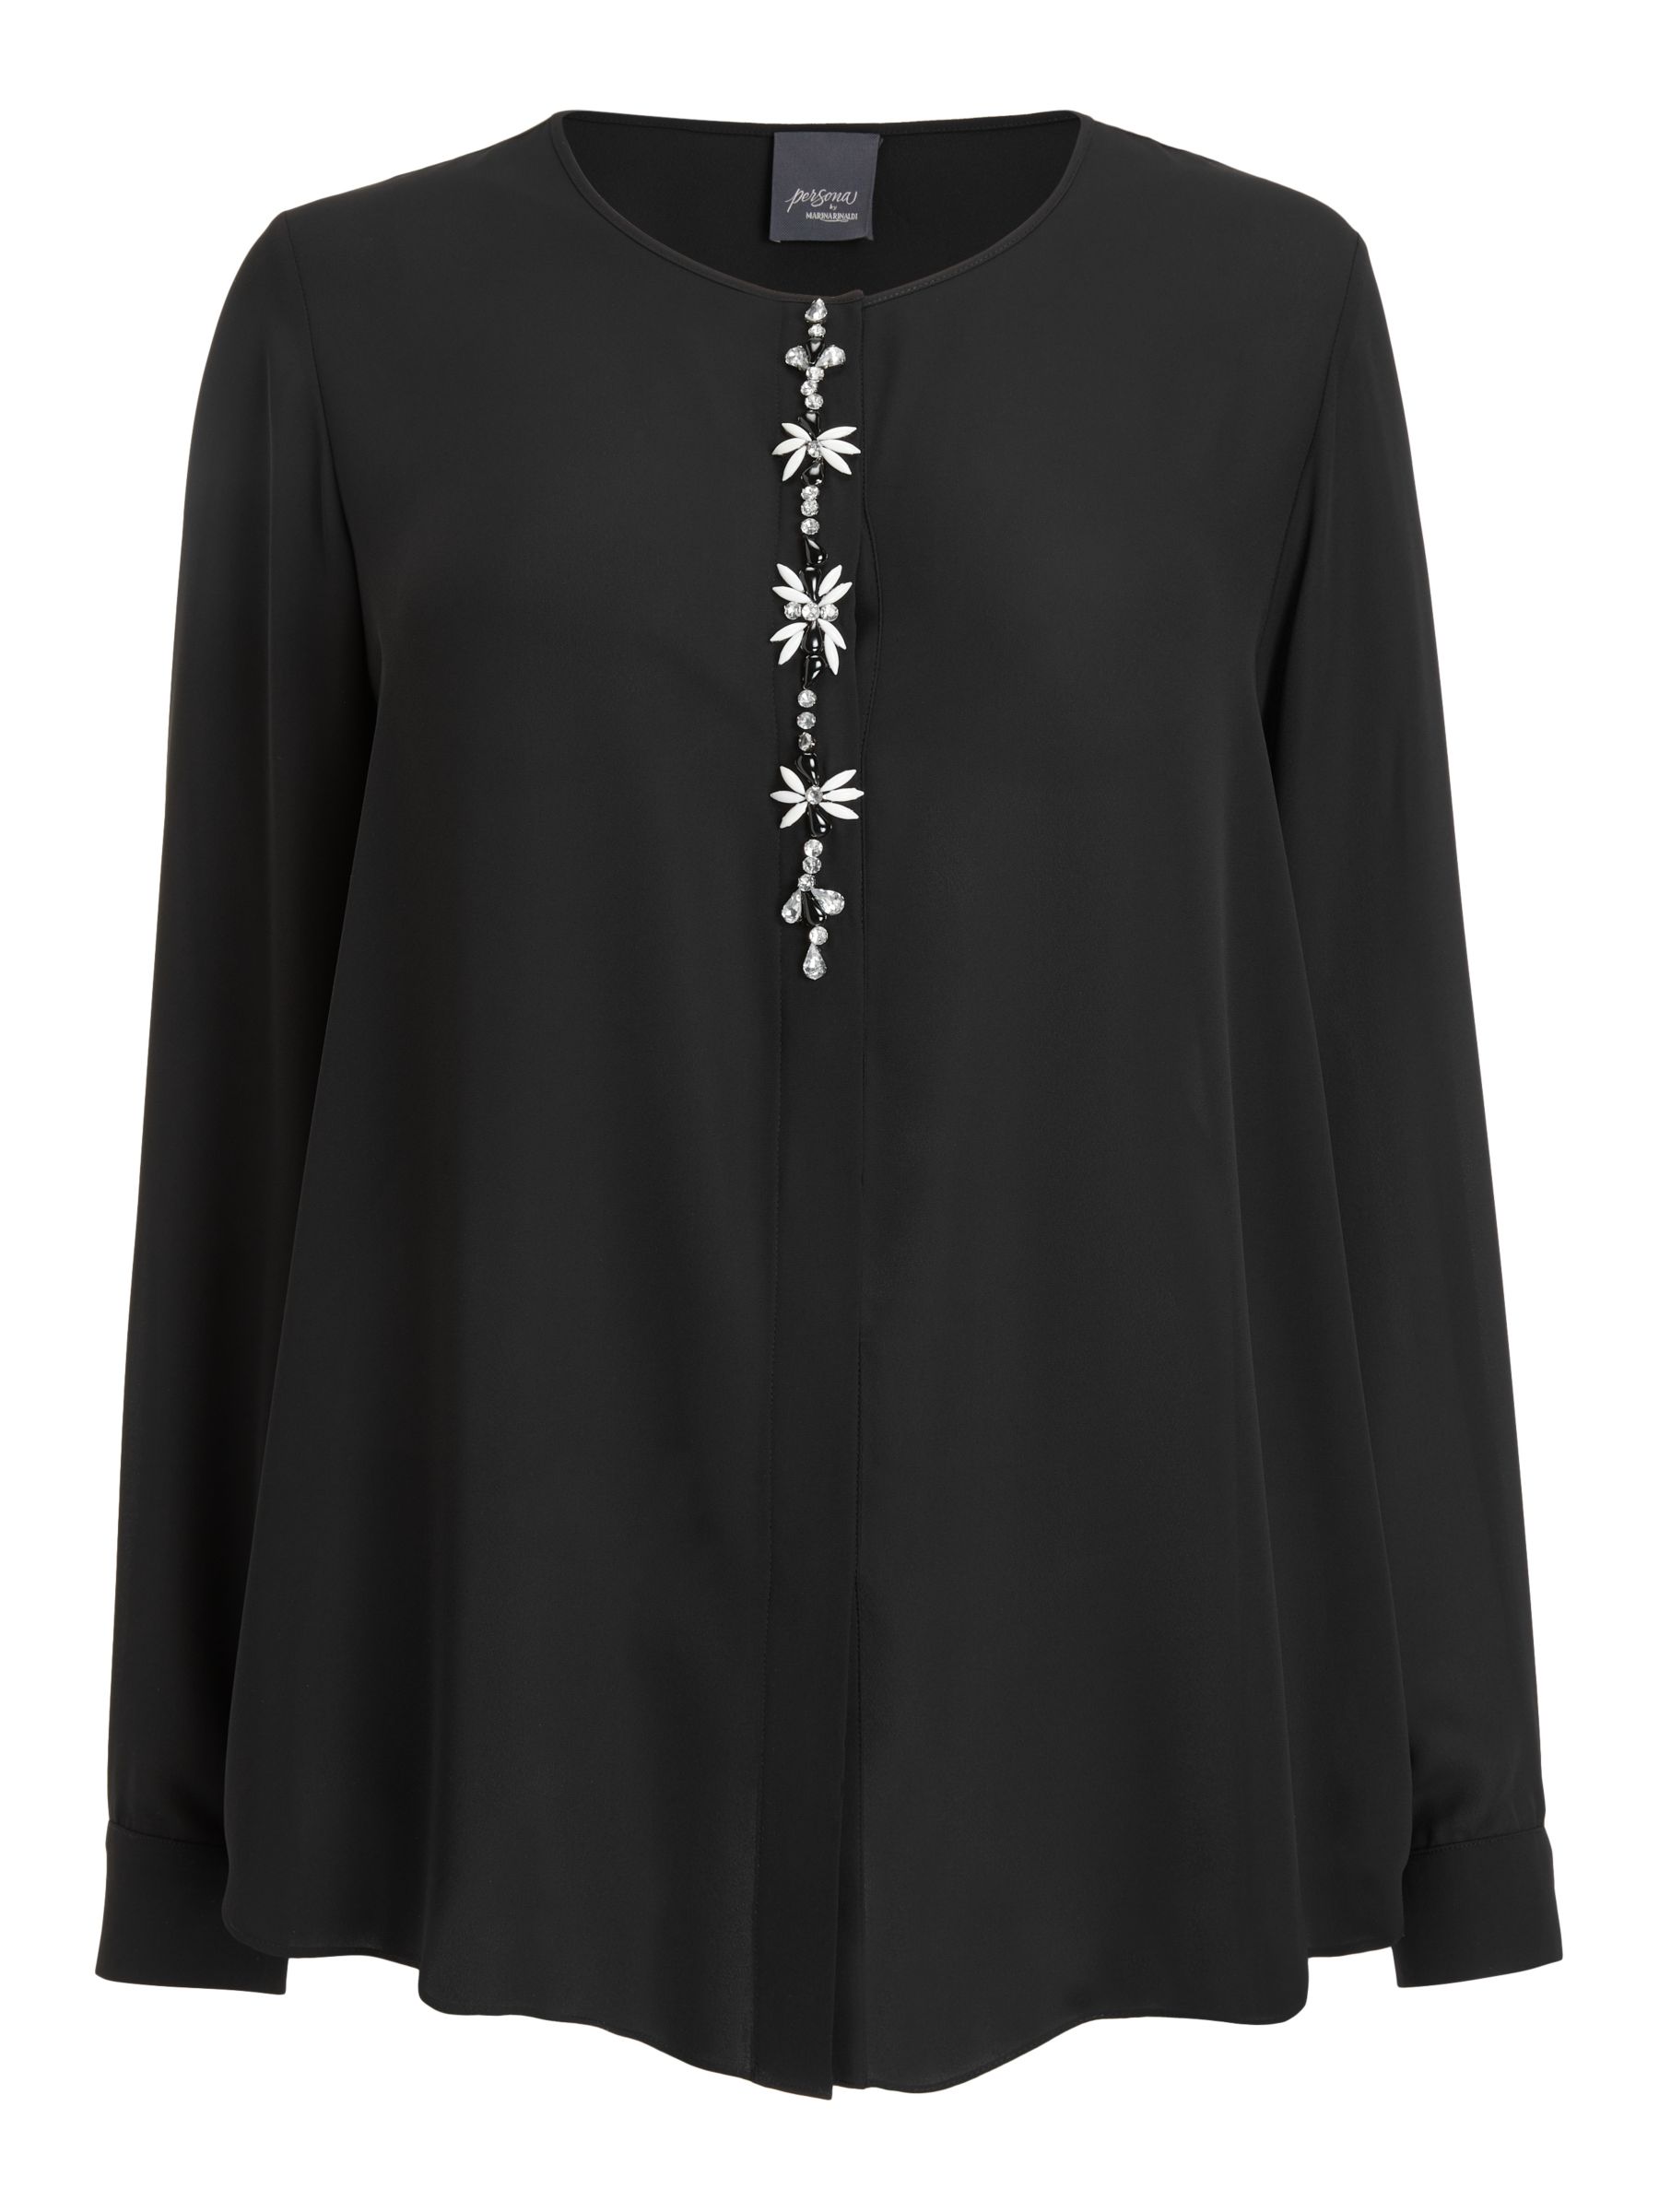 Persona by Marina Rinaldi Ruche blouse wit casual uitstraling Mode Blouses Ruche blouses 